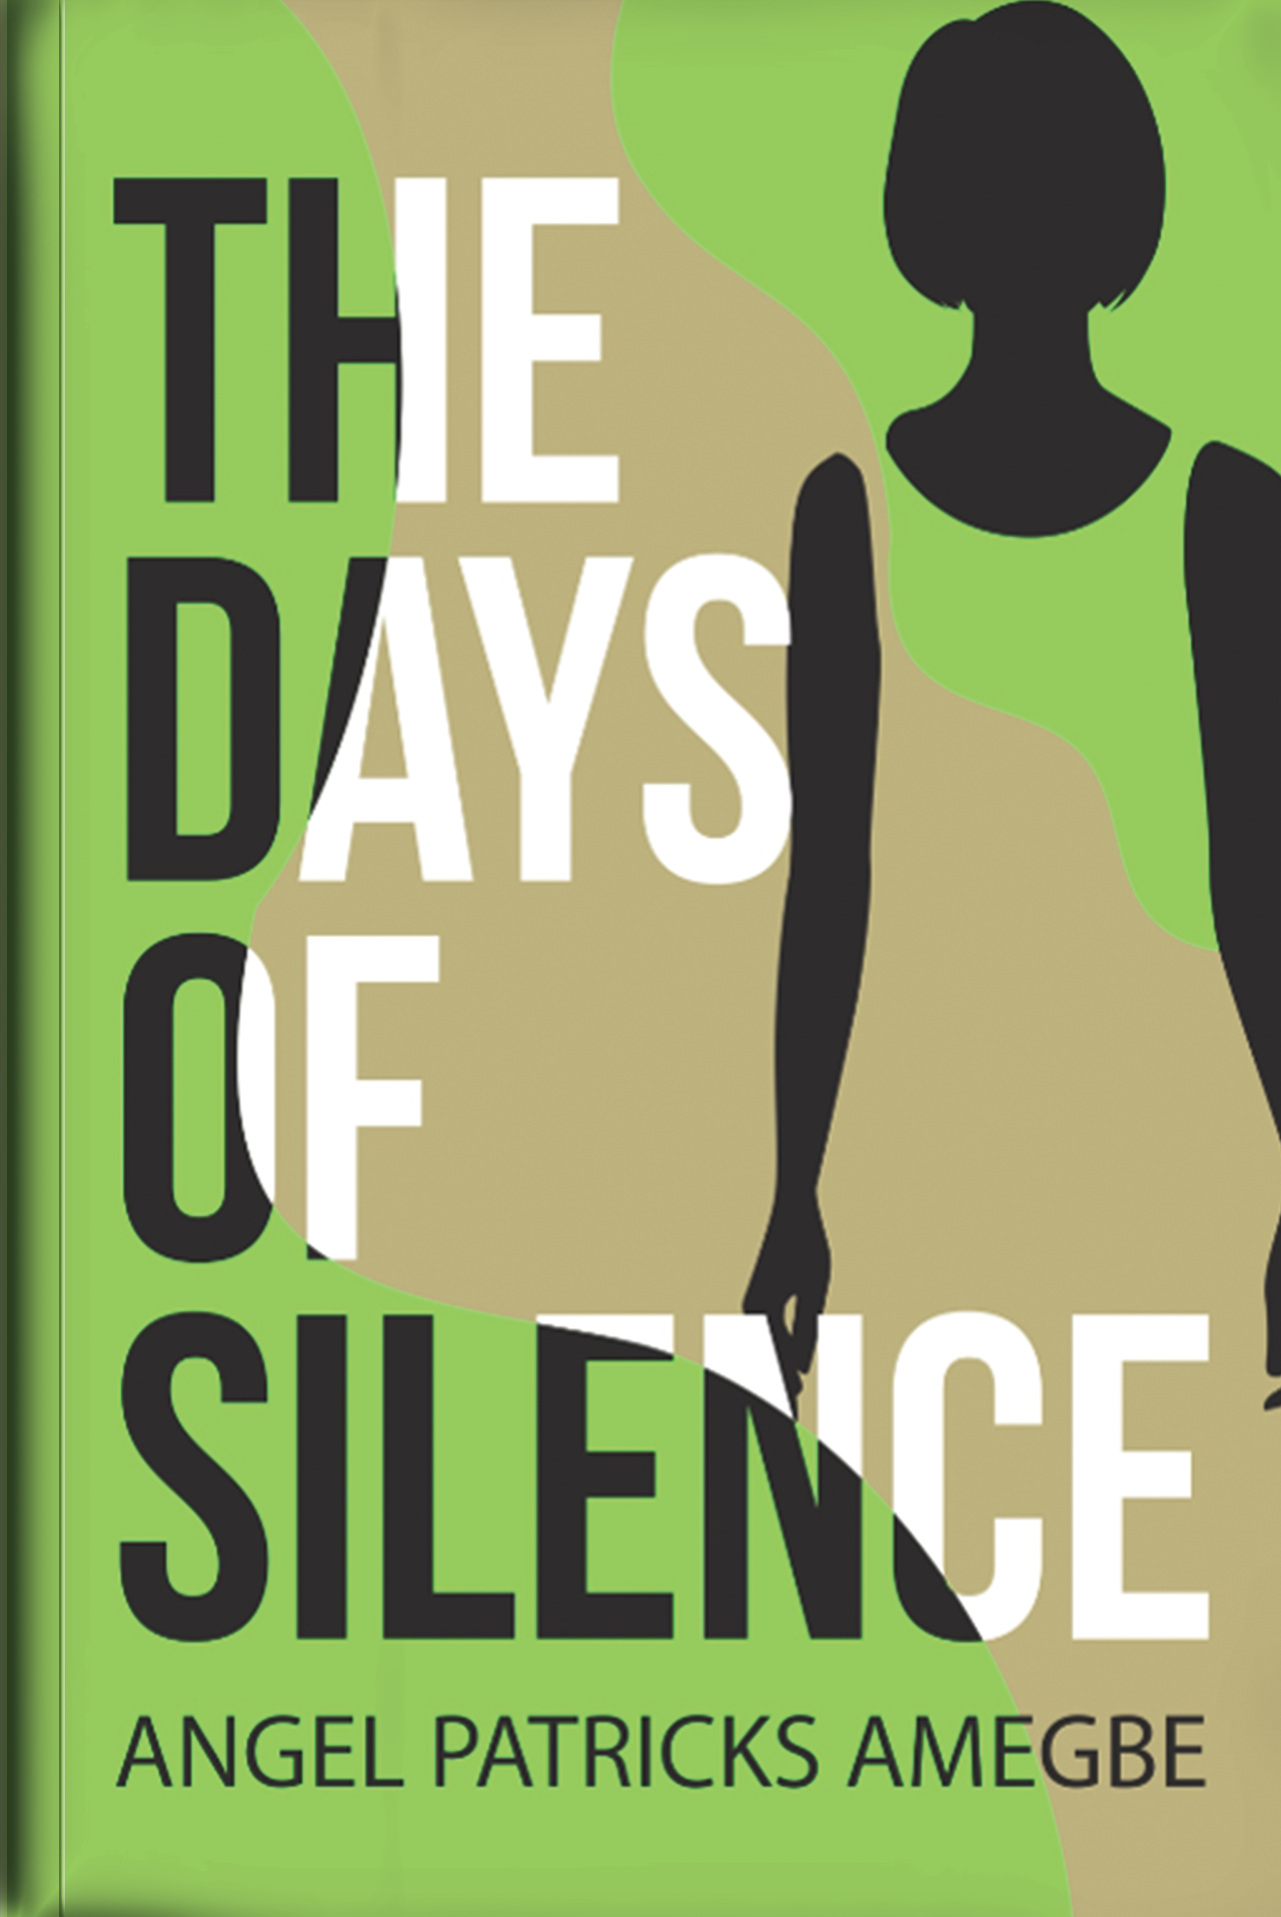 THE DAYS OF SILENCE